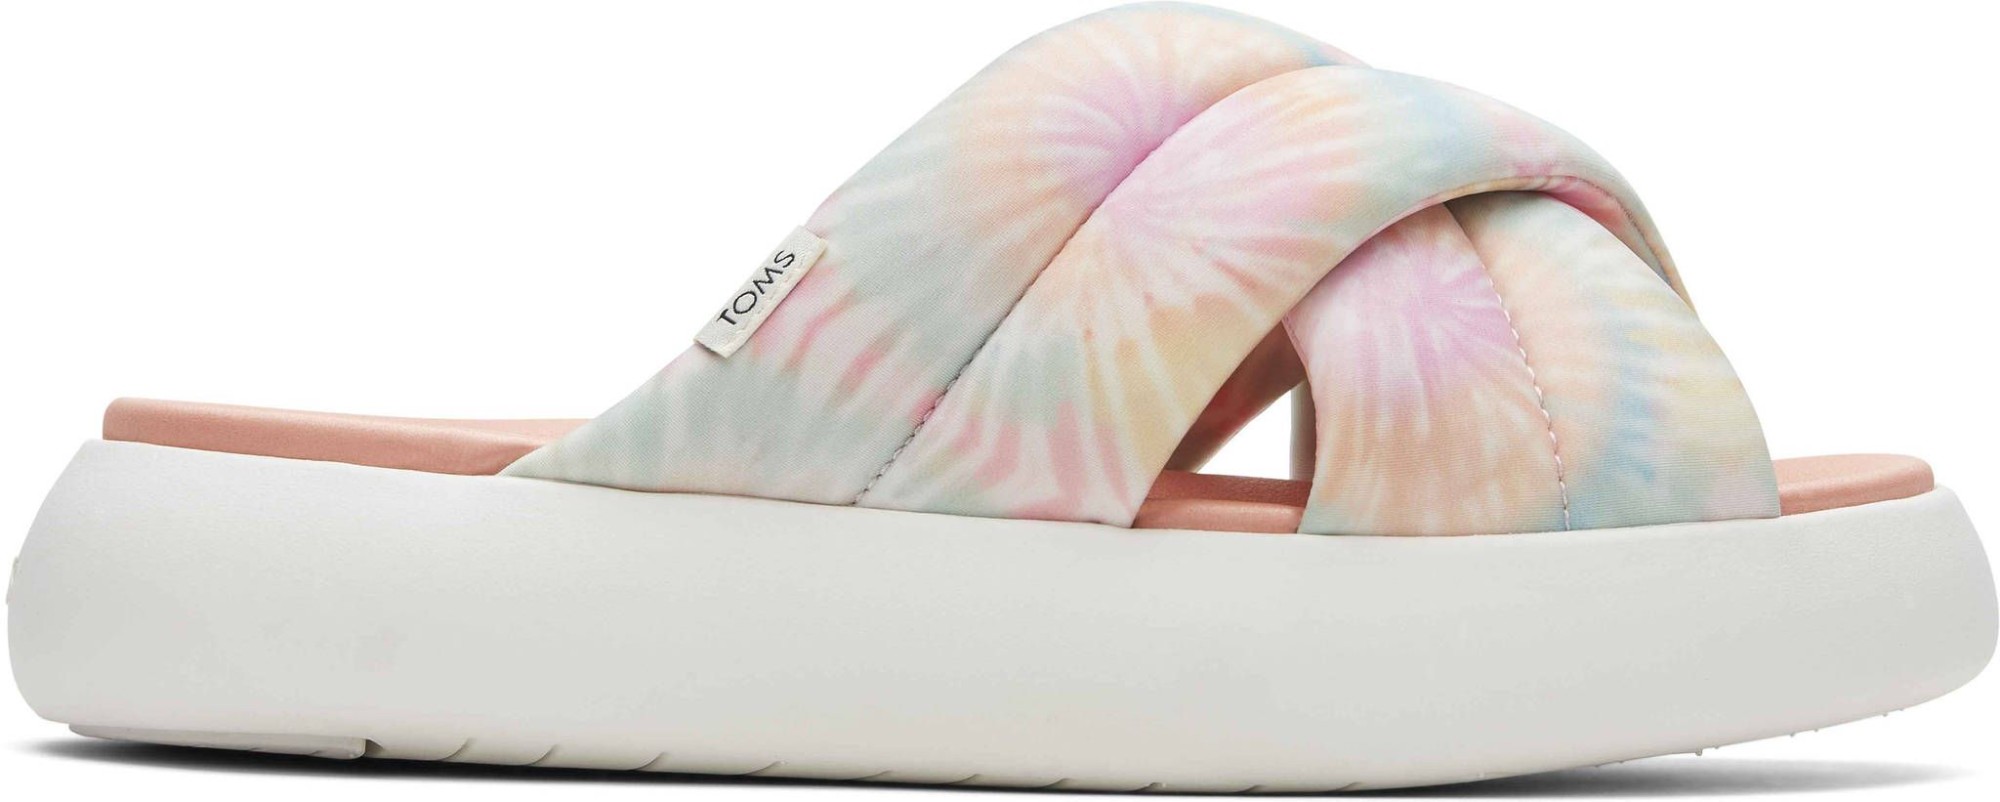 TOMS TieDye Repreve Jersey Mallow Crossover Sandal Candy Pink 36,5